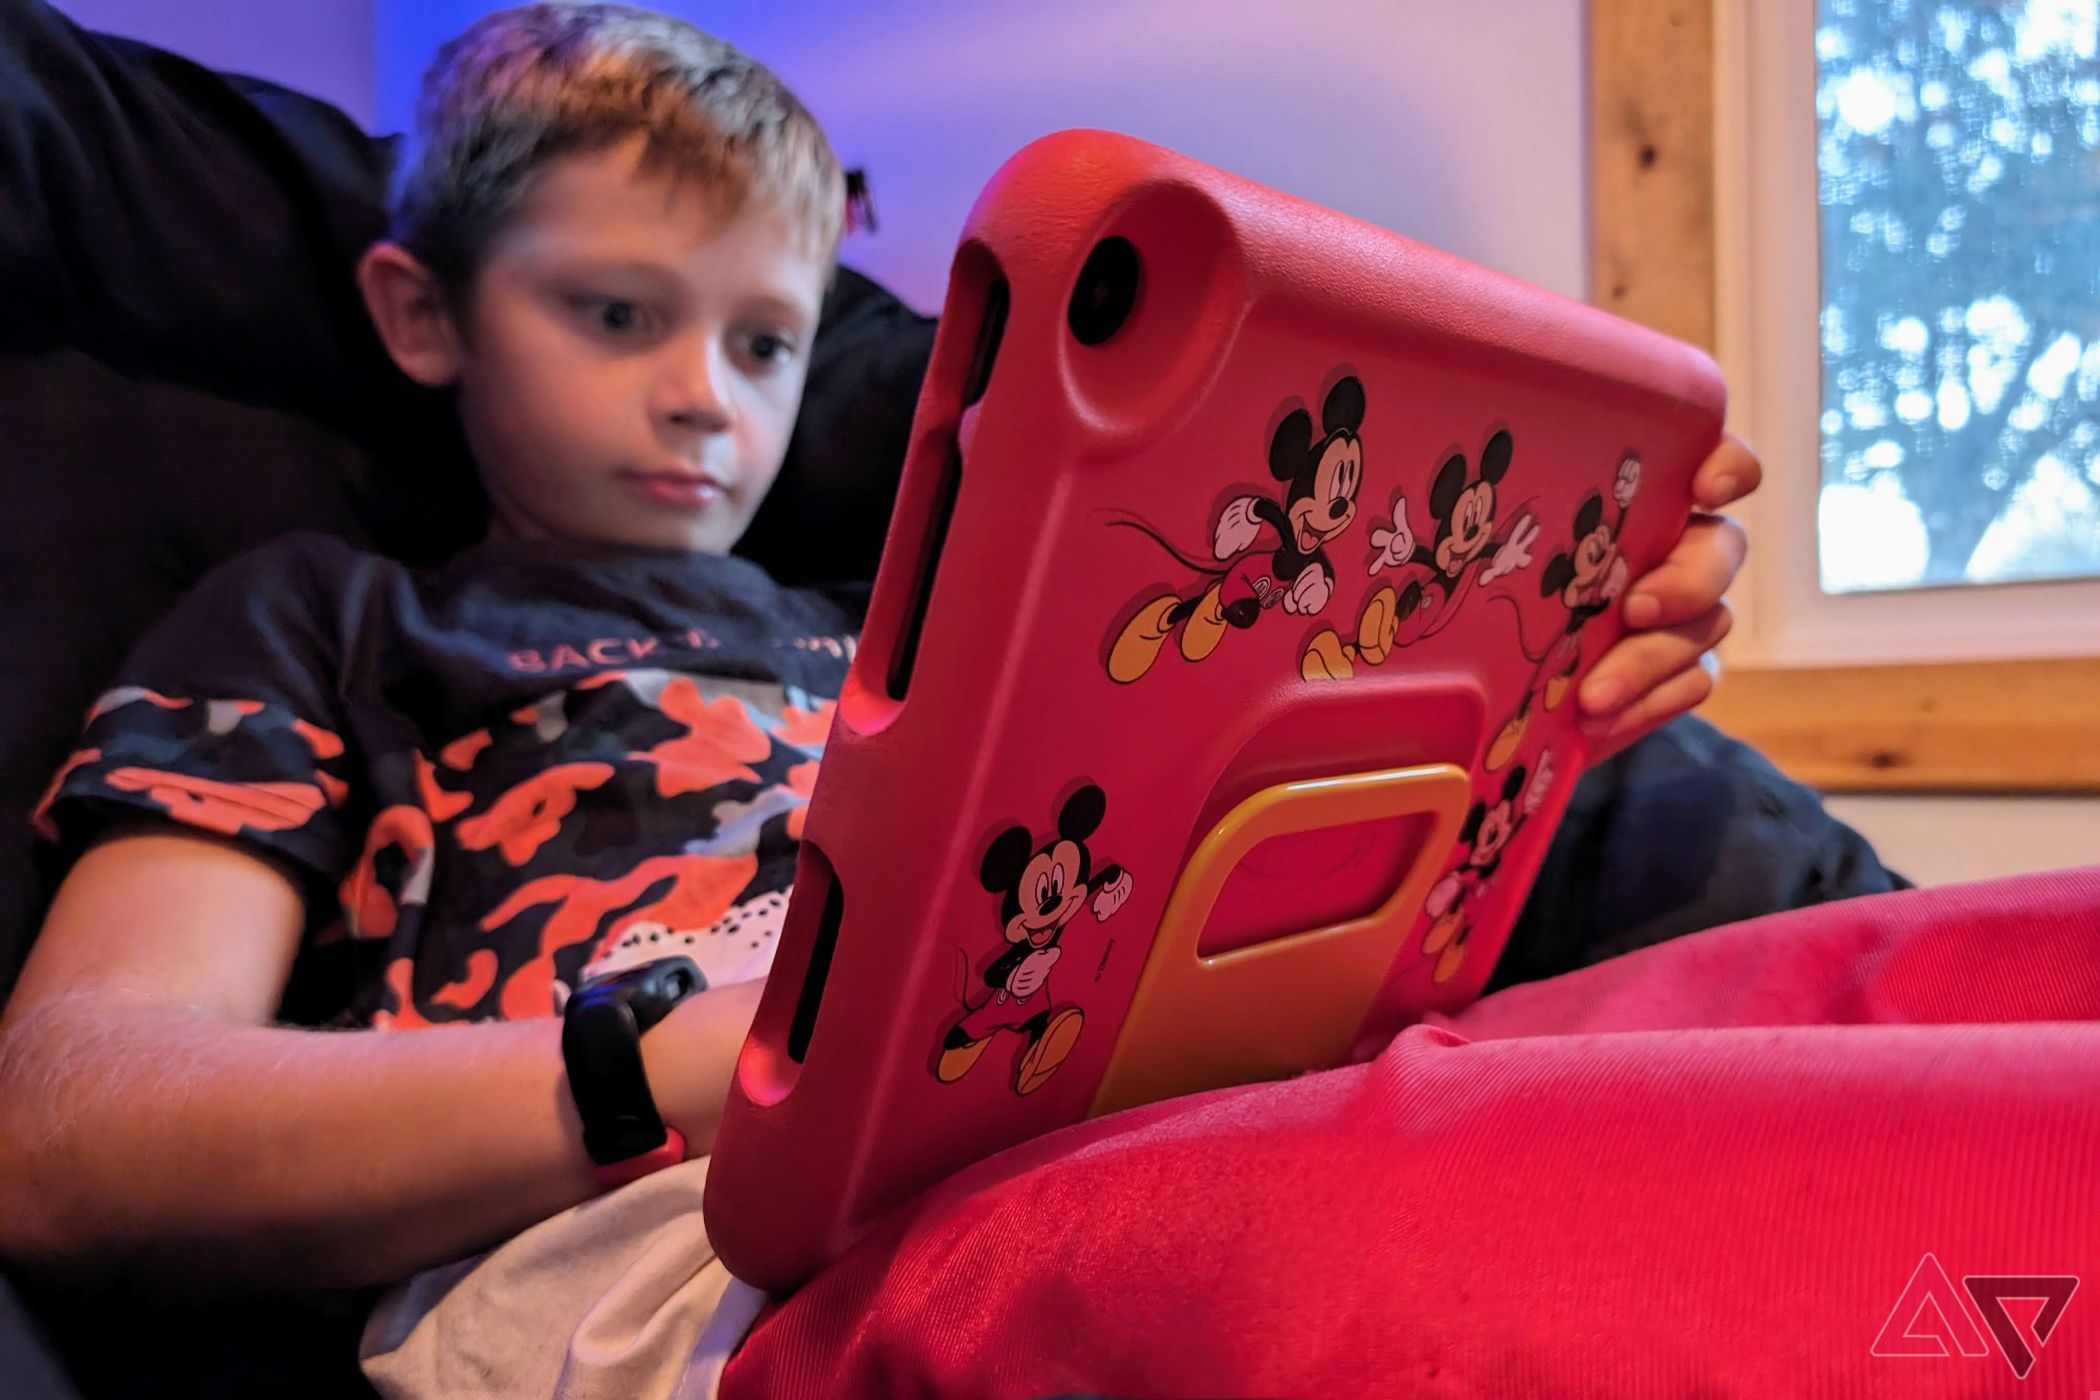 Fire HD 10 Kids (2023) review: Setting the standard, again